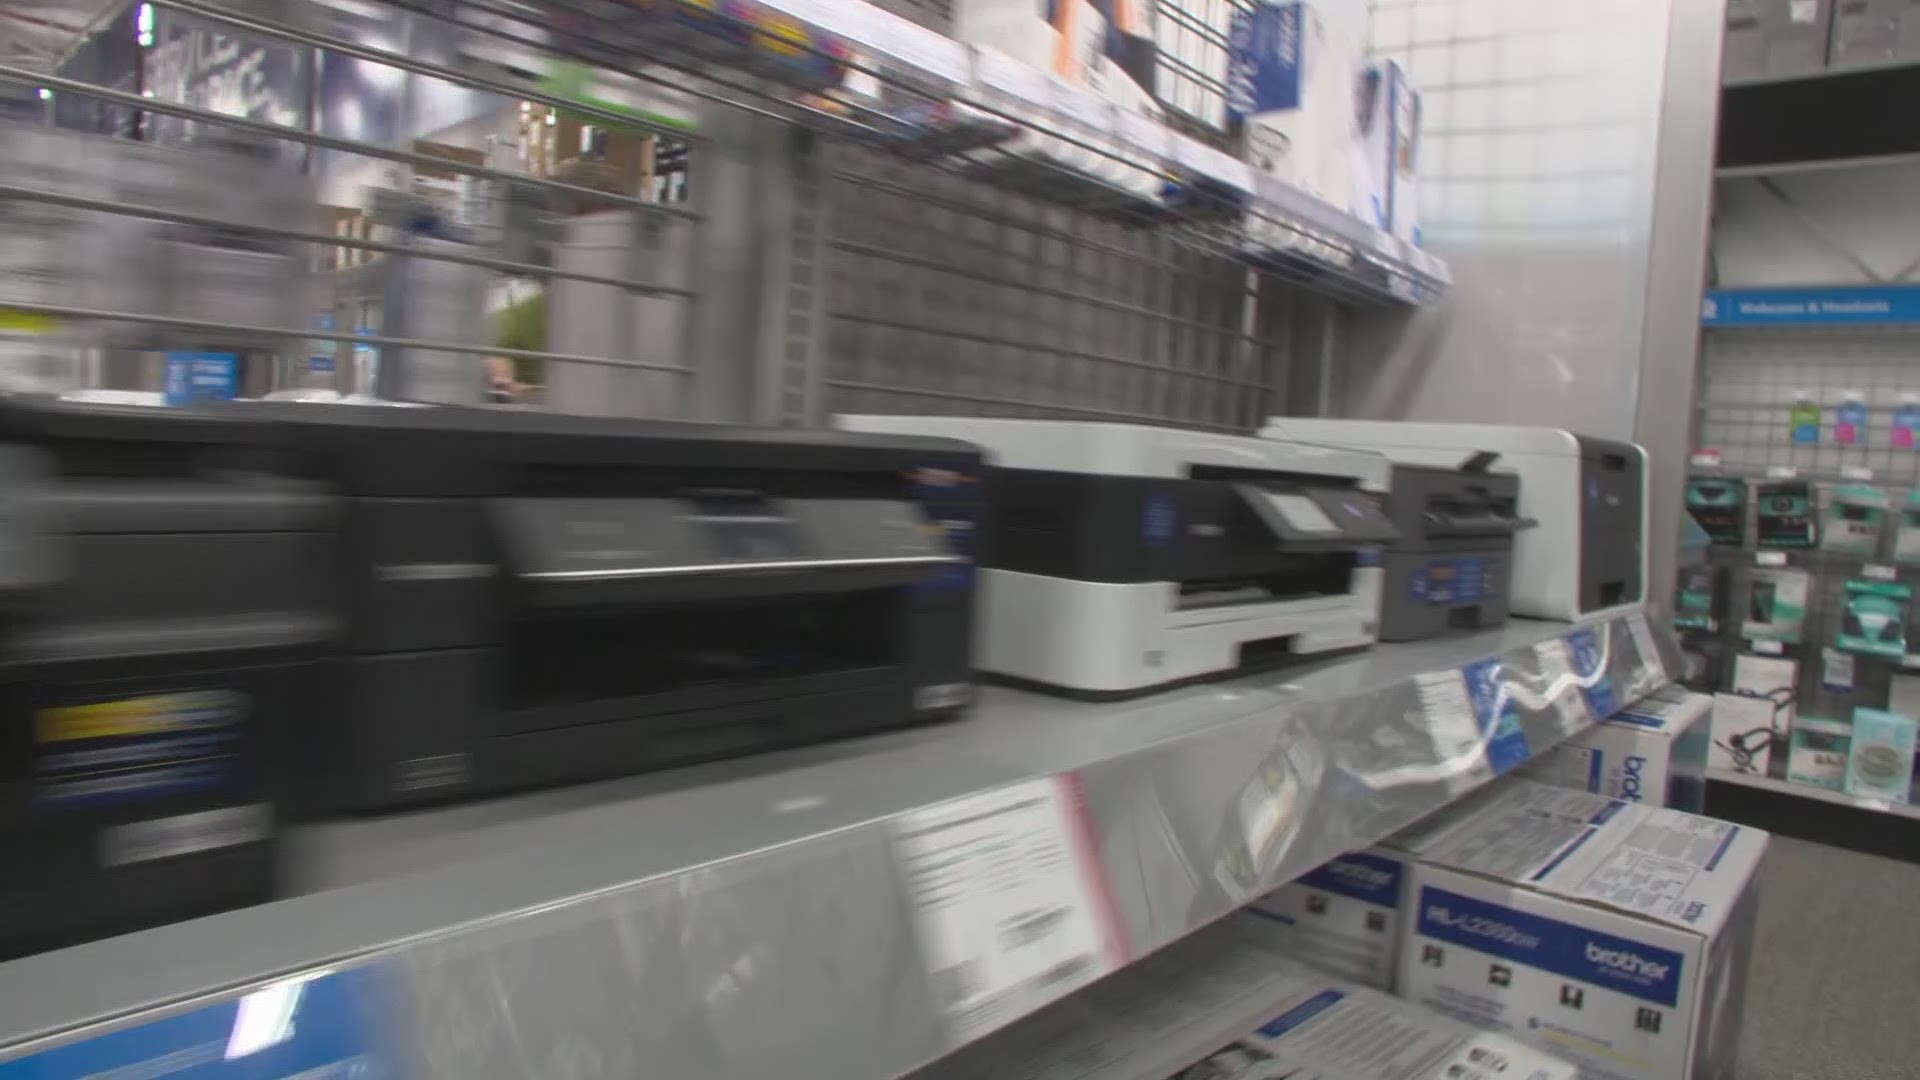 Consumer Reports offers some tips to help you save money on printer ink.